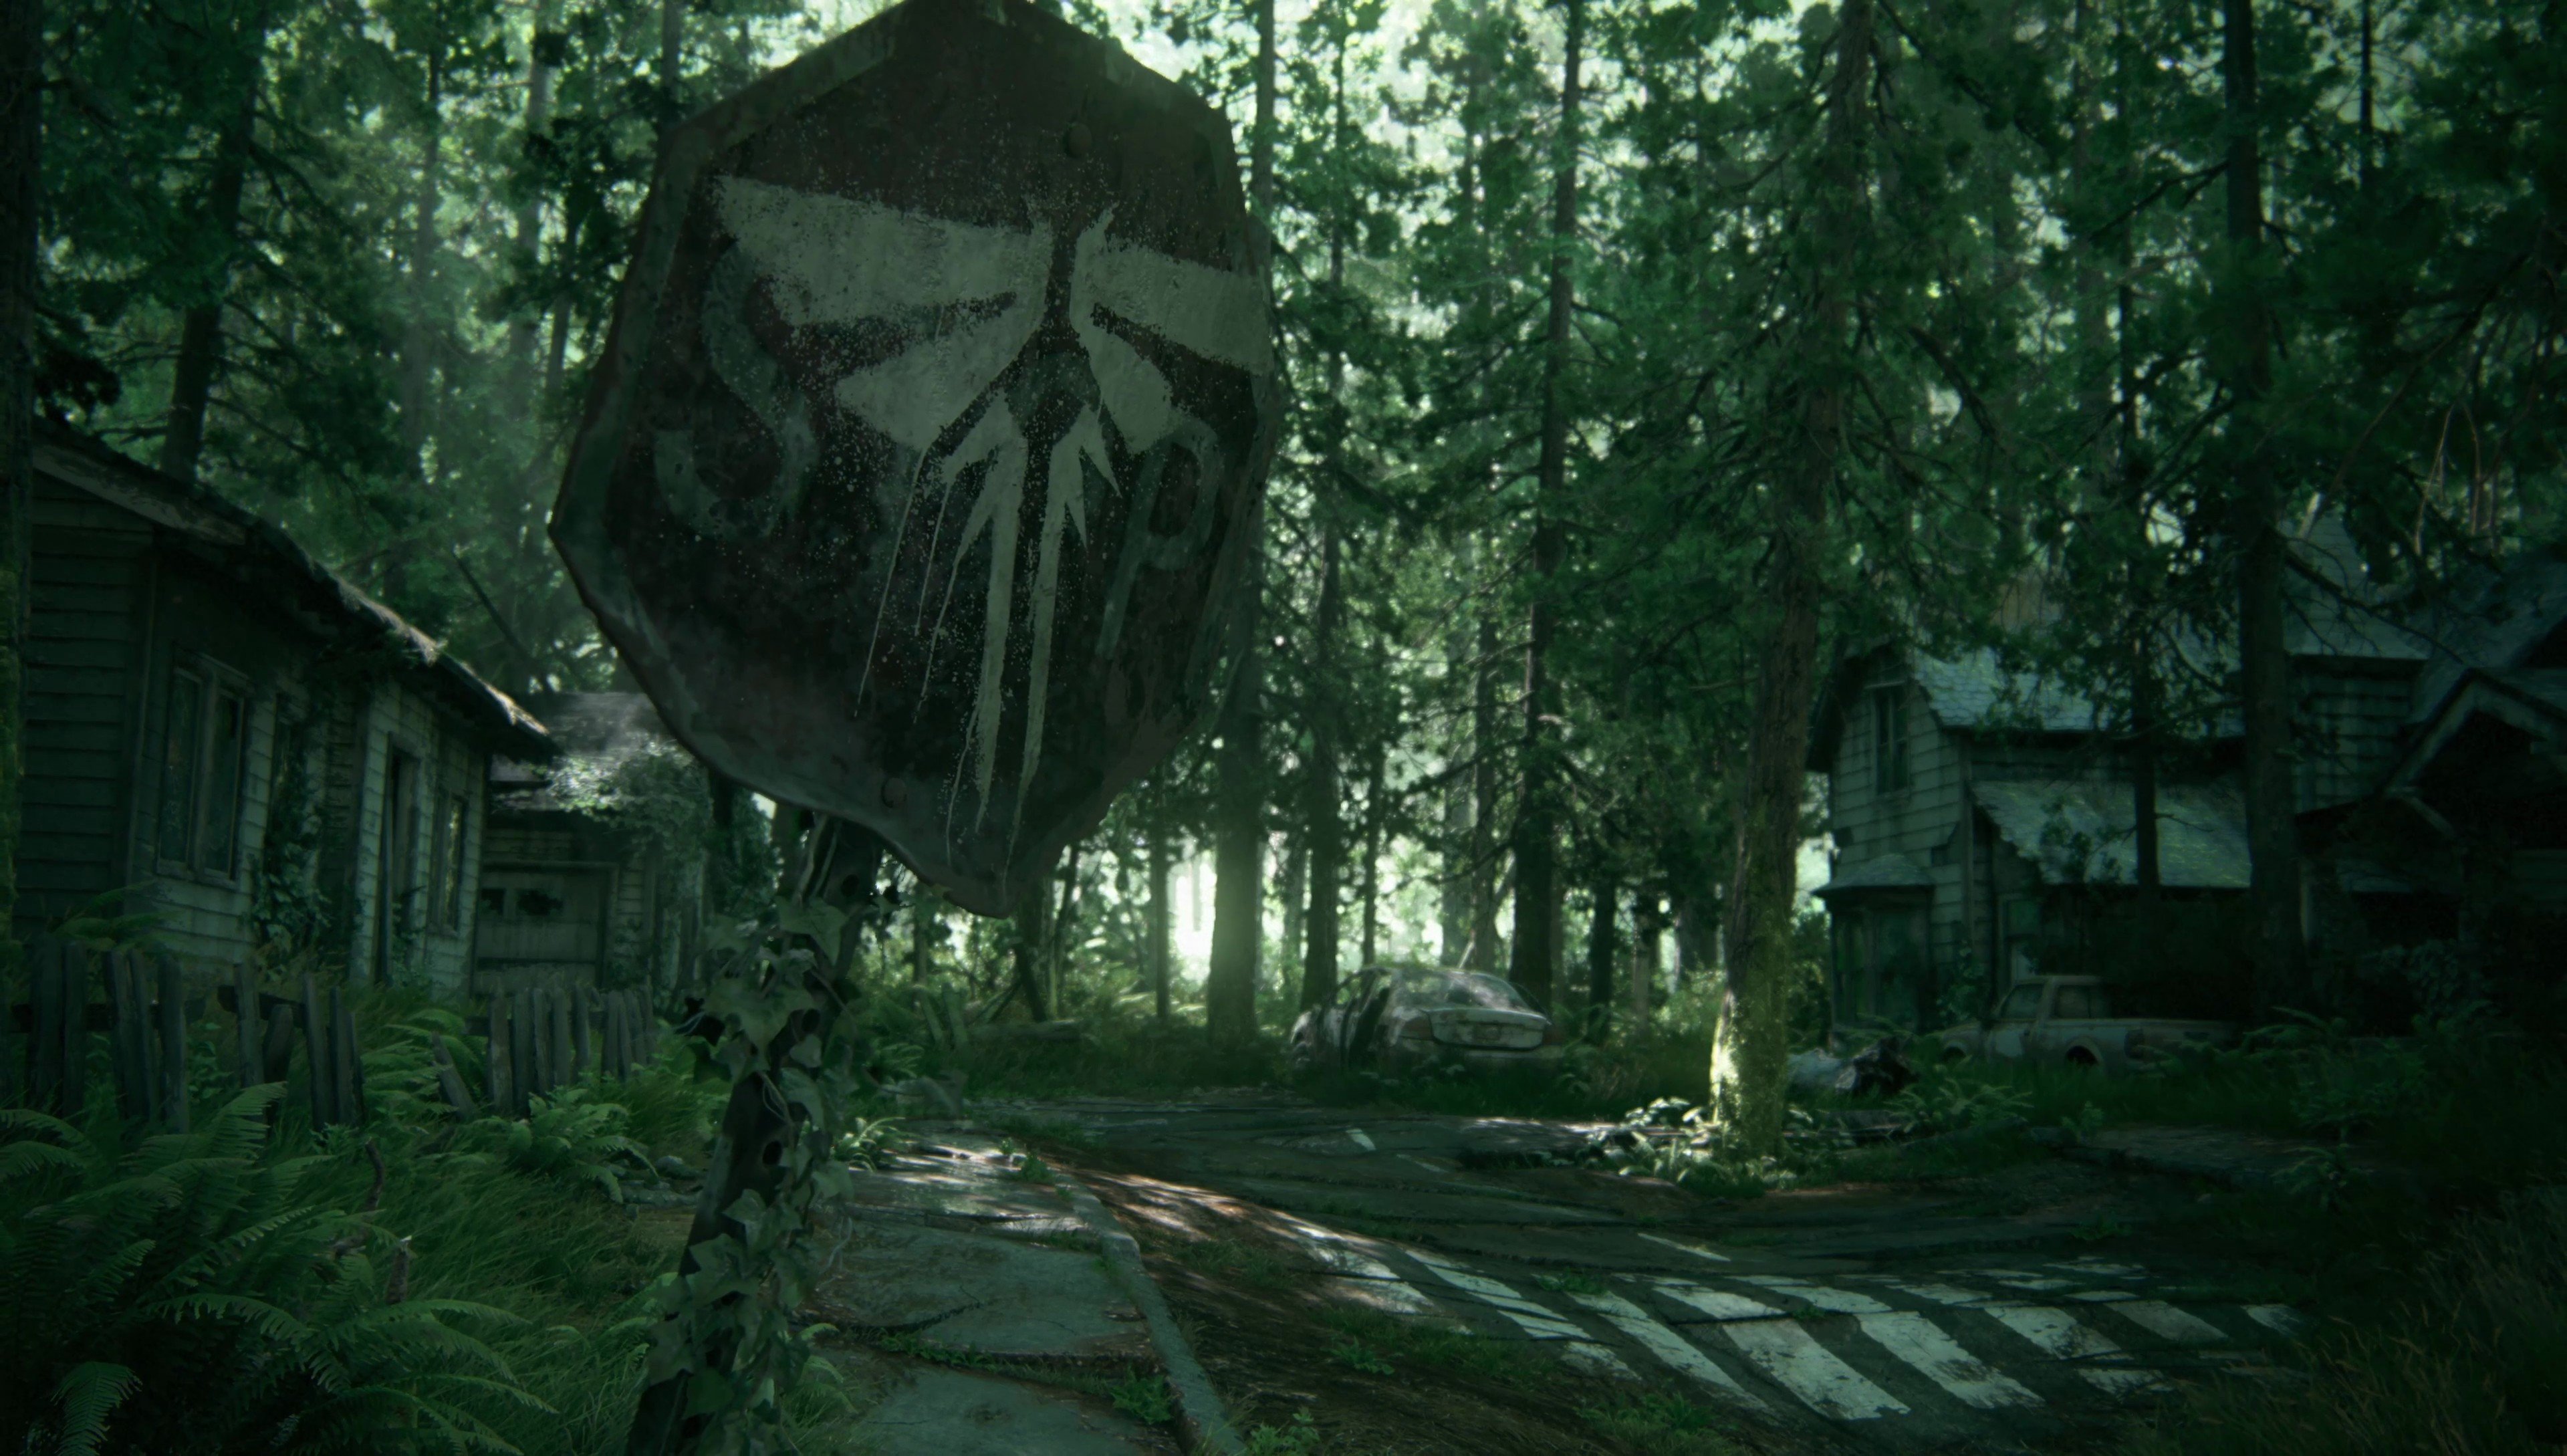 Ellie, Joel, The Last of Us, Part II, Apocalyptic, Video games, Forest Wallpaper